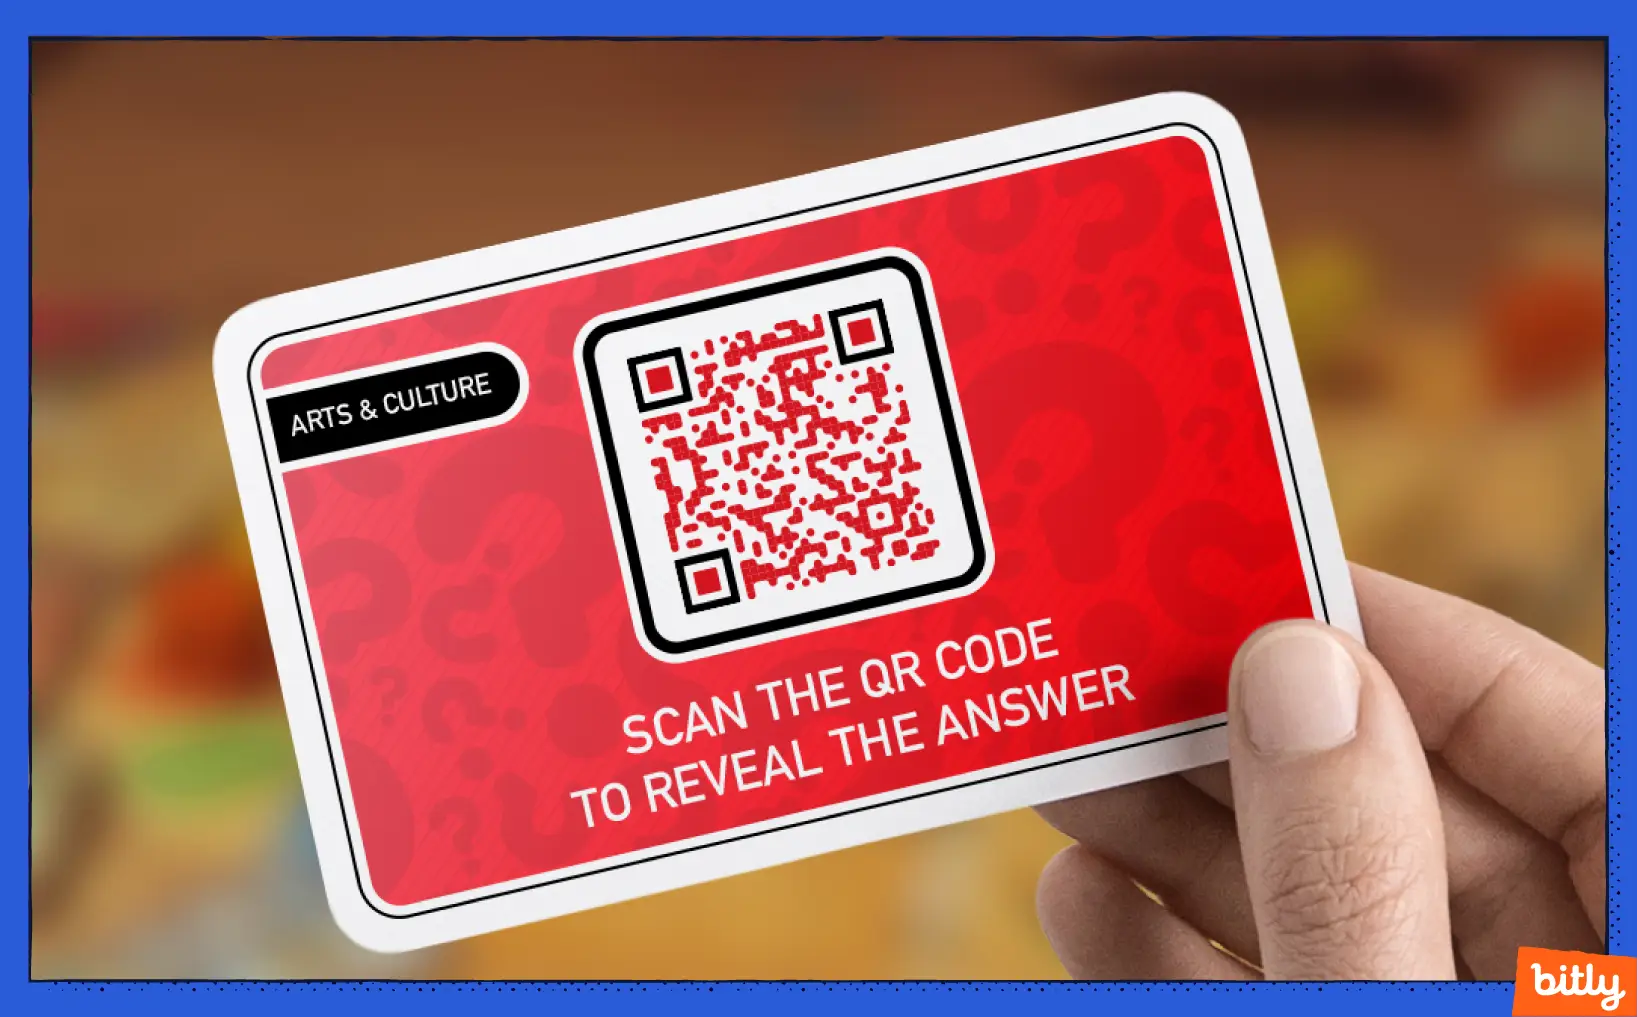 A red Arts & Culture Card with a QR Code and a scan the QR Code to reveal the answer call-to-action